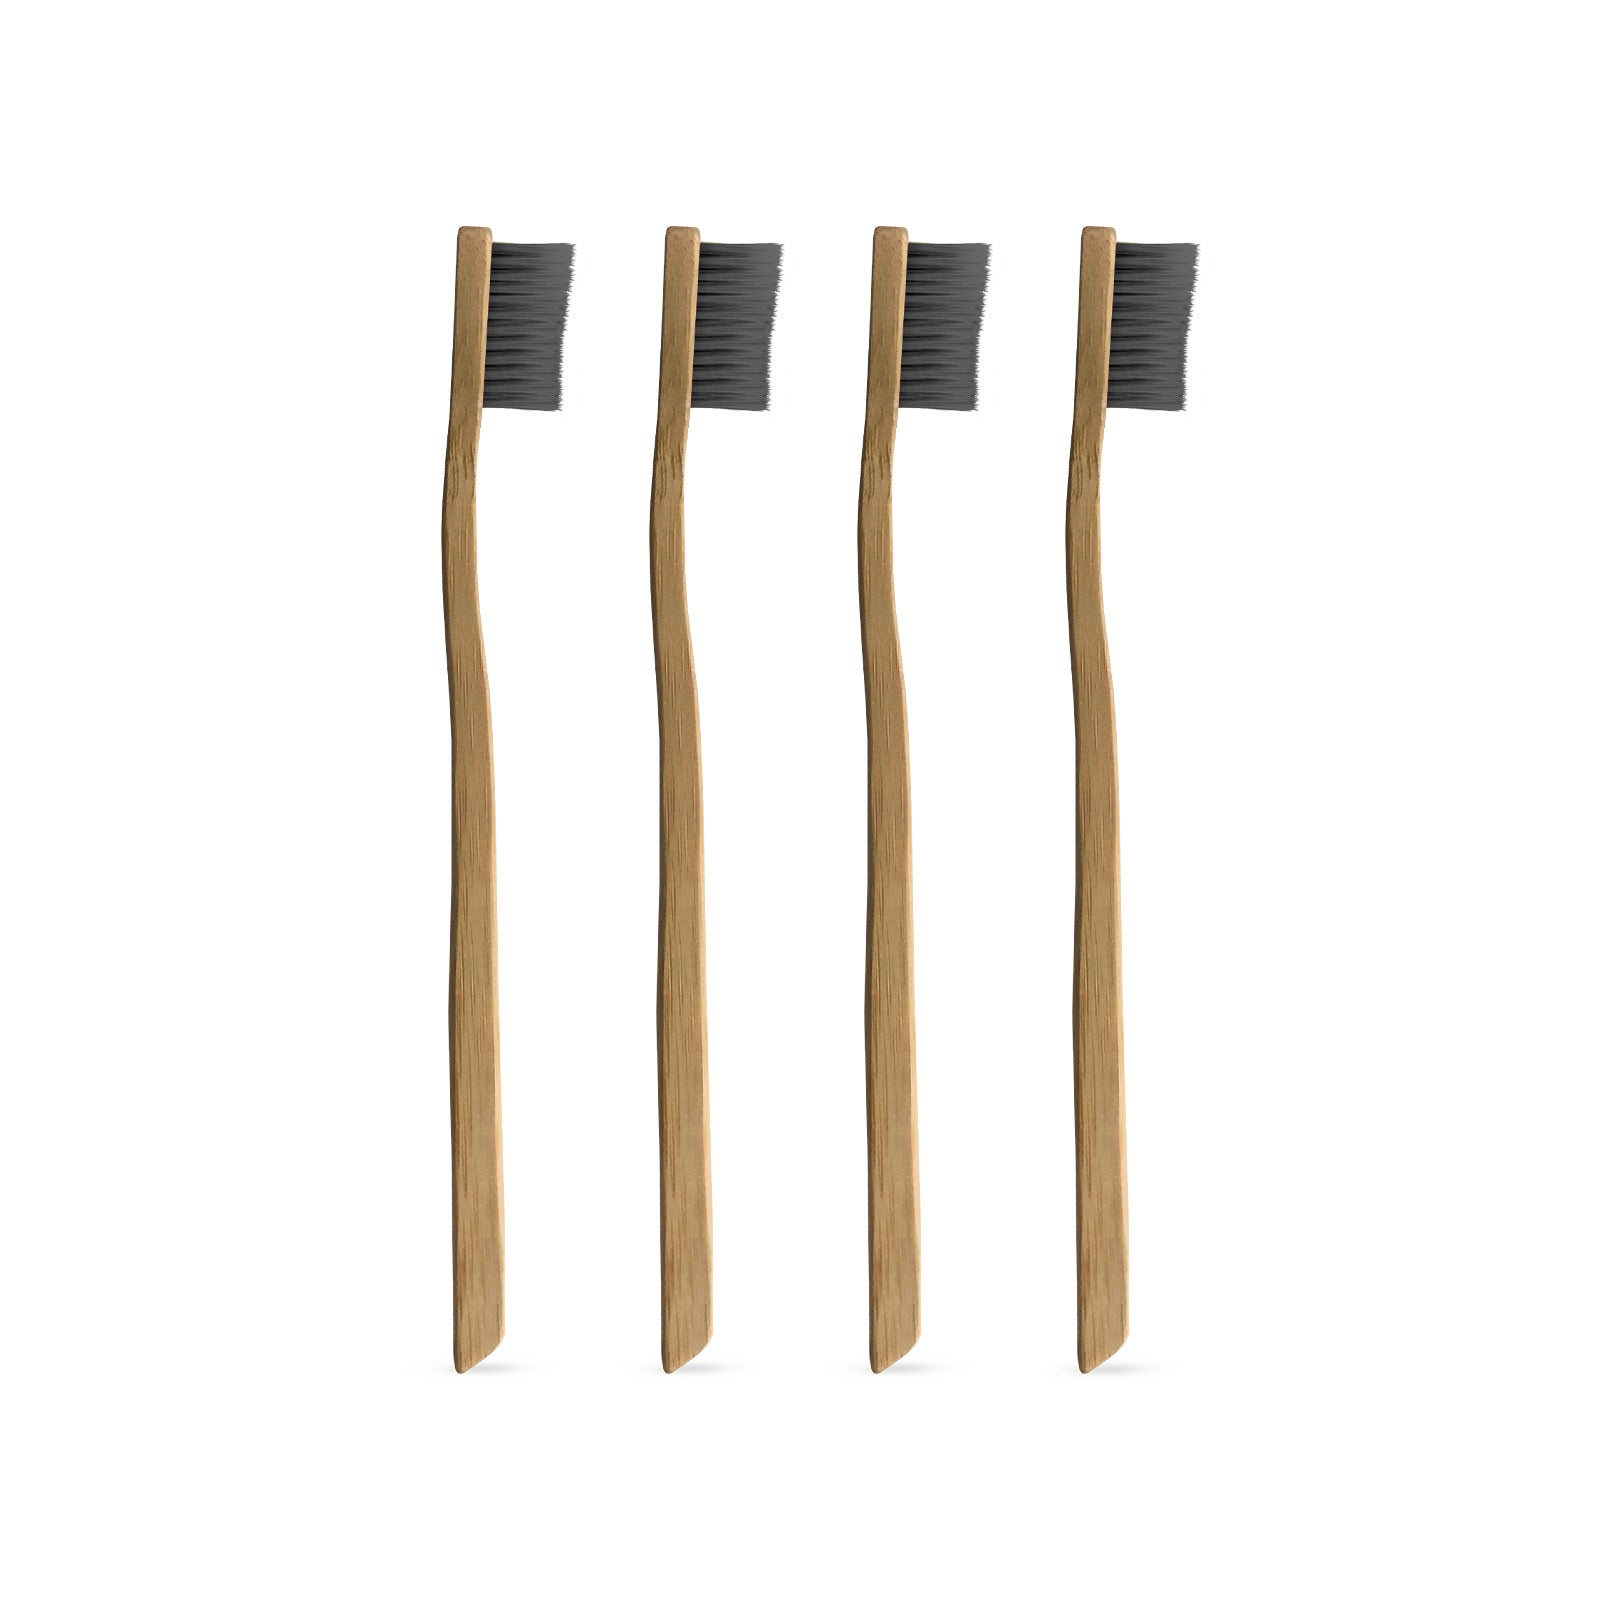 Natural and Organic Silver Bristle Bamboo Toothbrush - 4 Pack